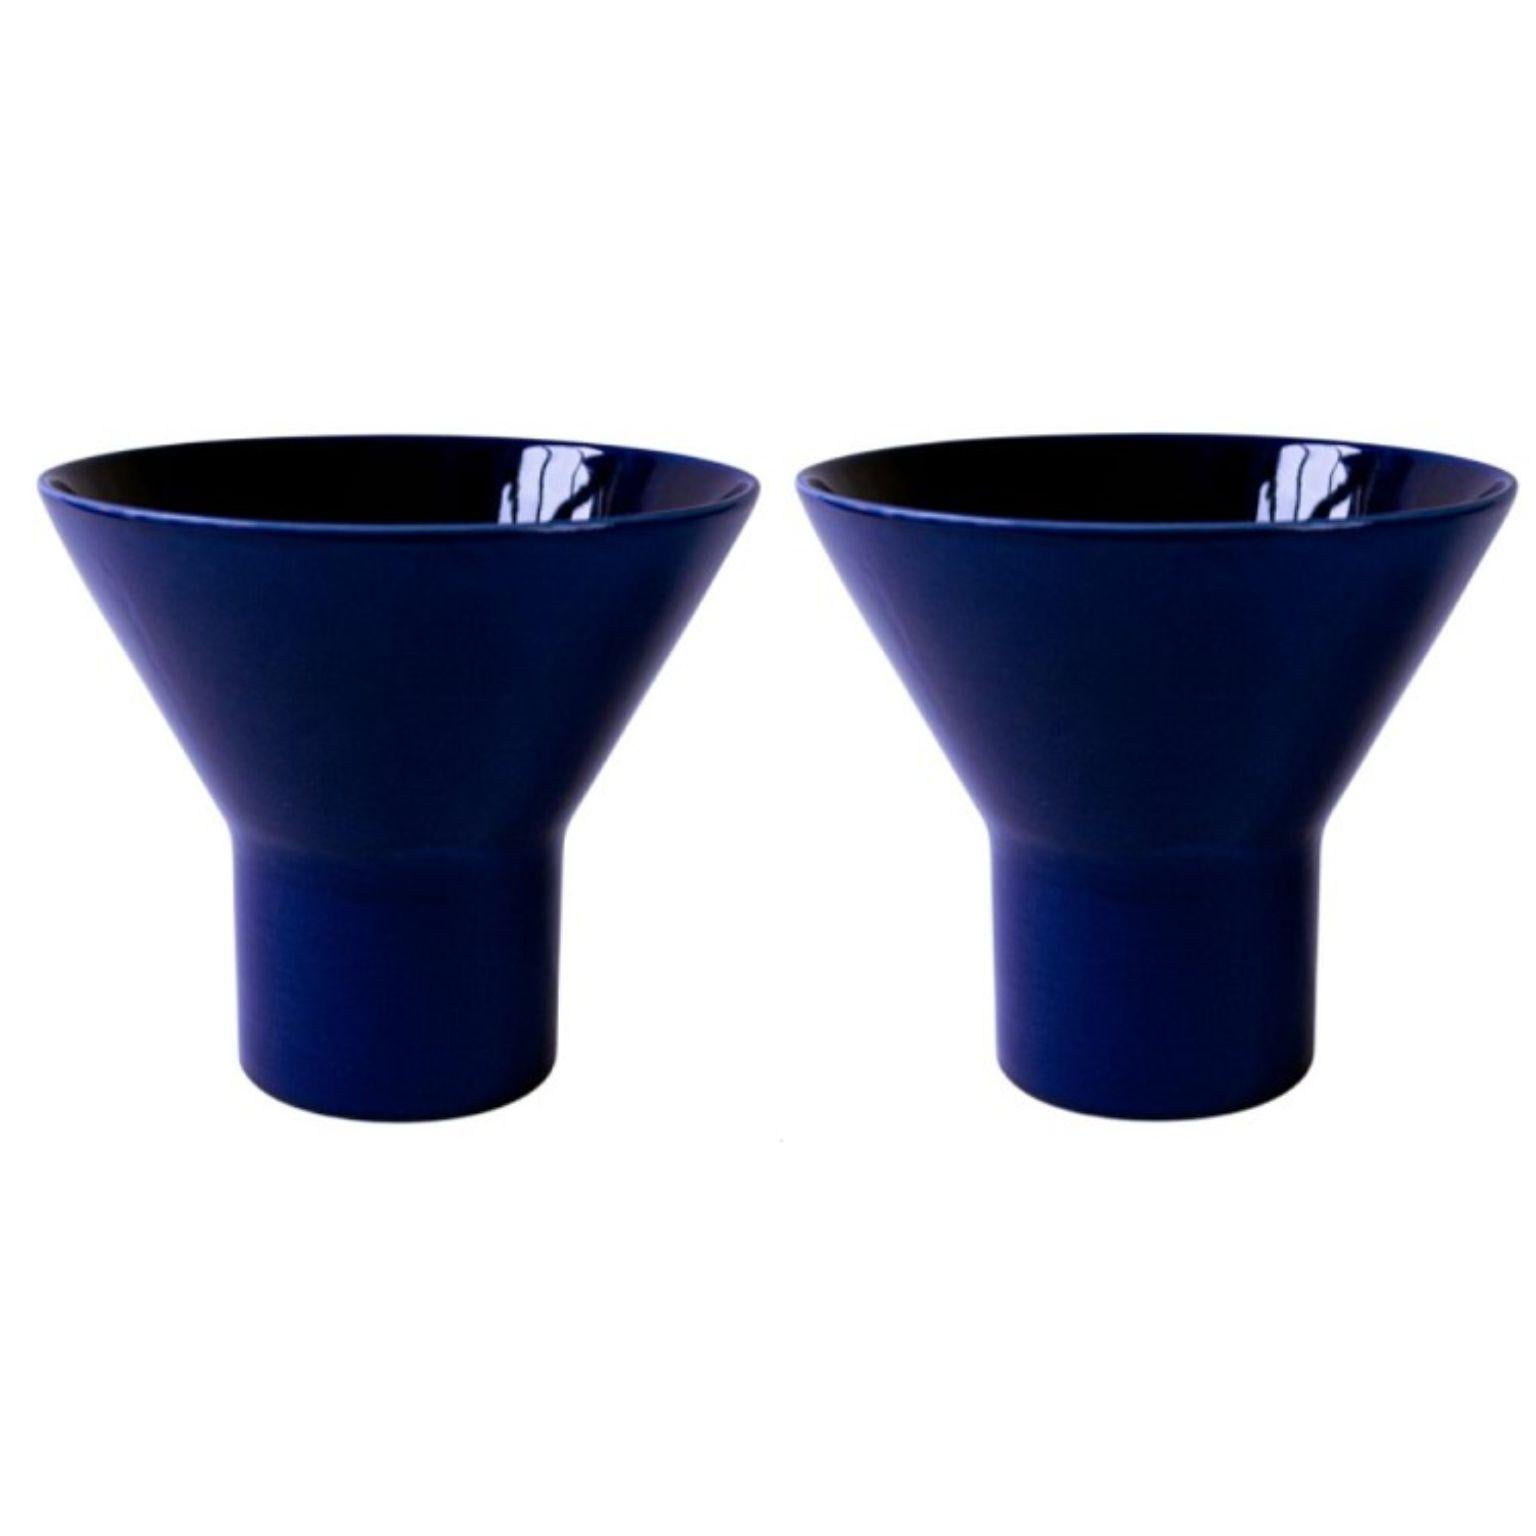 Set of 2 large blue ceramic KYO vases by Mazo Design
Dimensions: D 29 x H 26 cm
Materials: glazed ceramic.

Both functional and sculptural, the new collection from mazo is very Scandinavian and Japanese at the same time. The series consists of